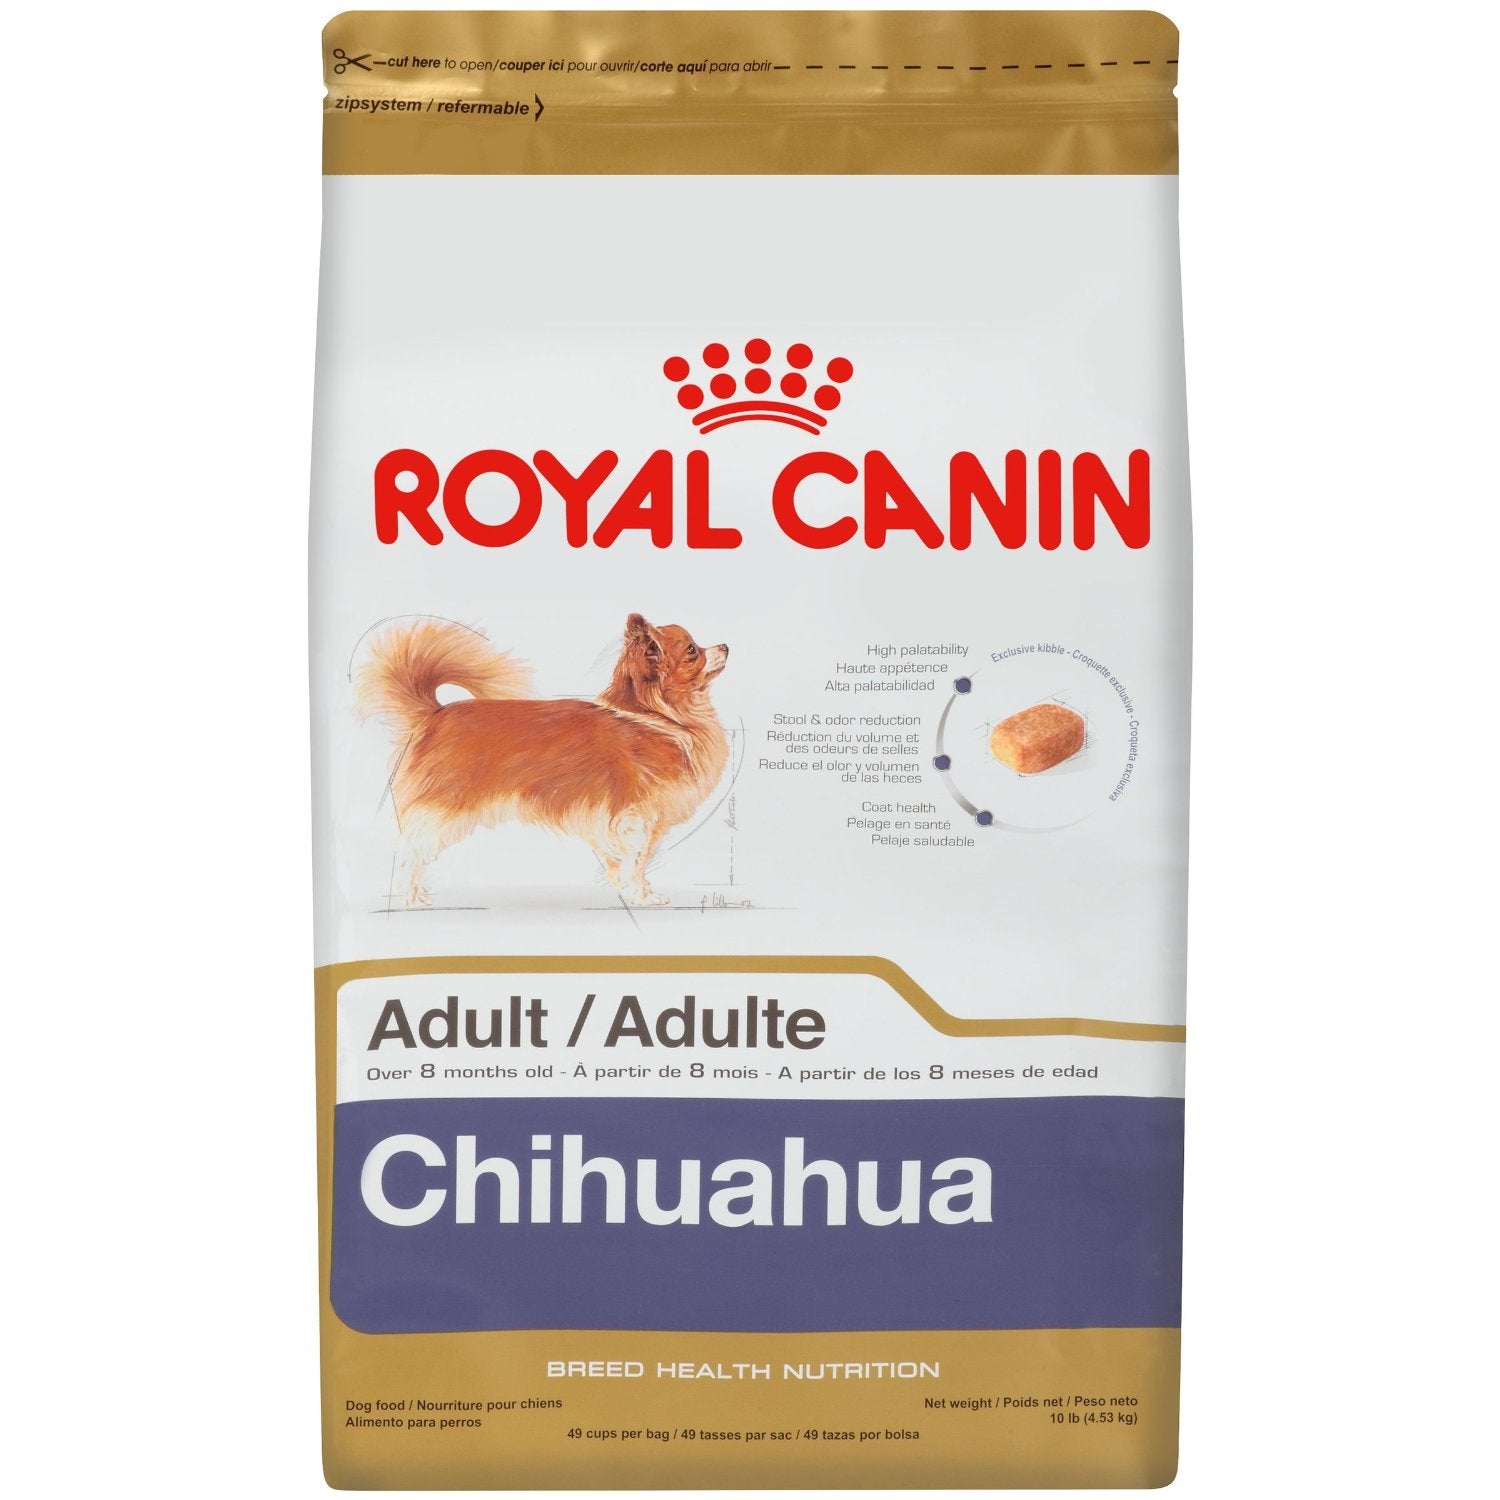 Royal Canin Free* NJ Local Delivery |